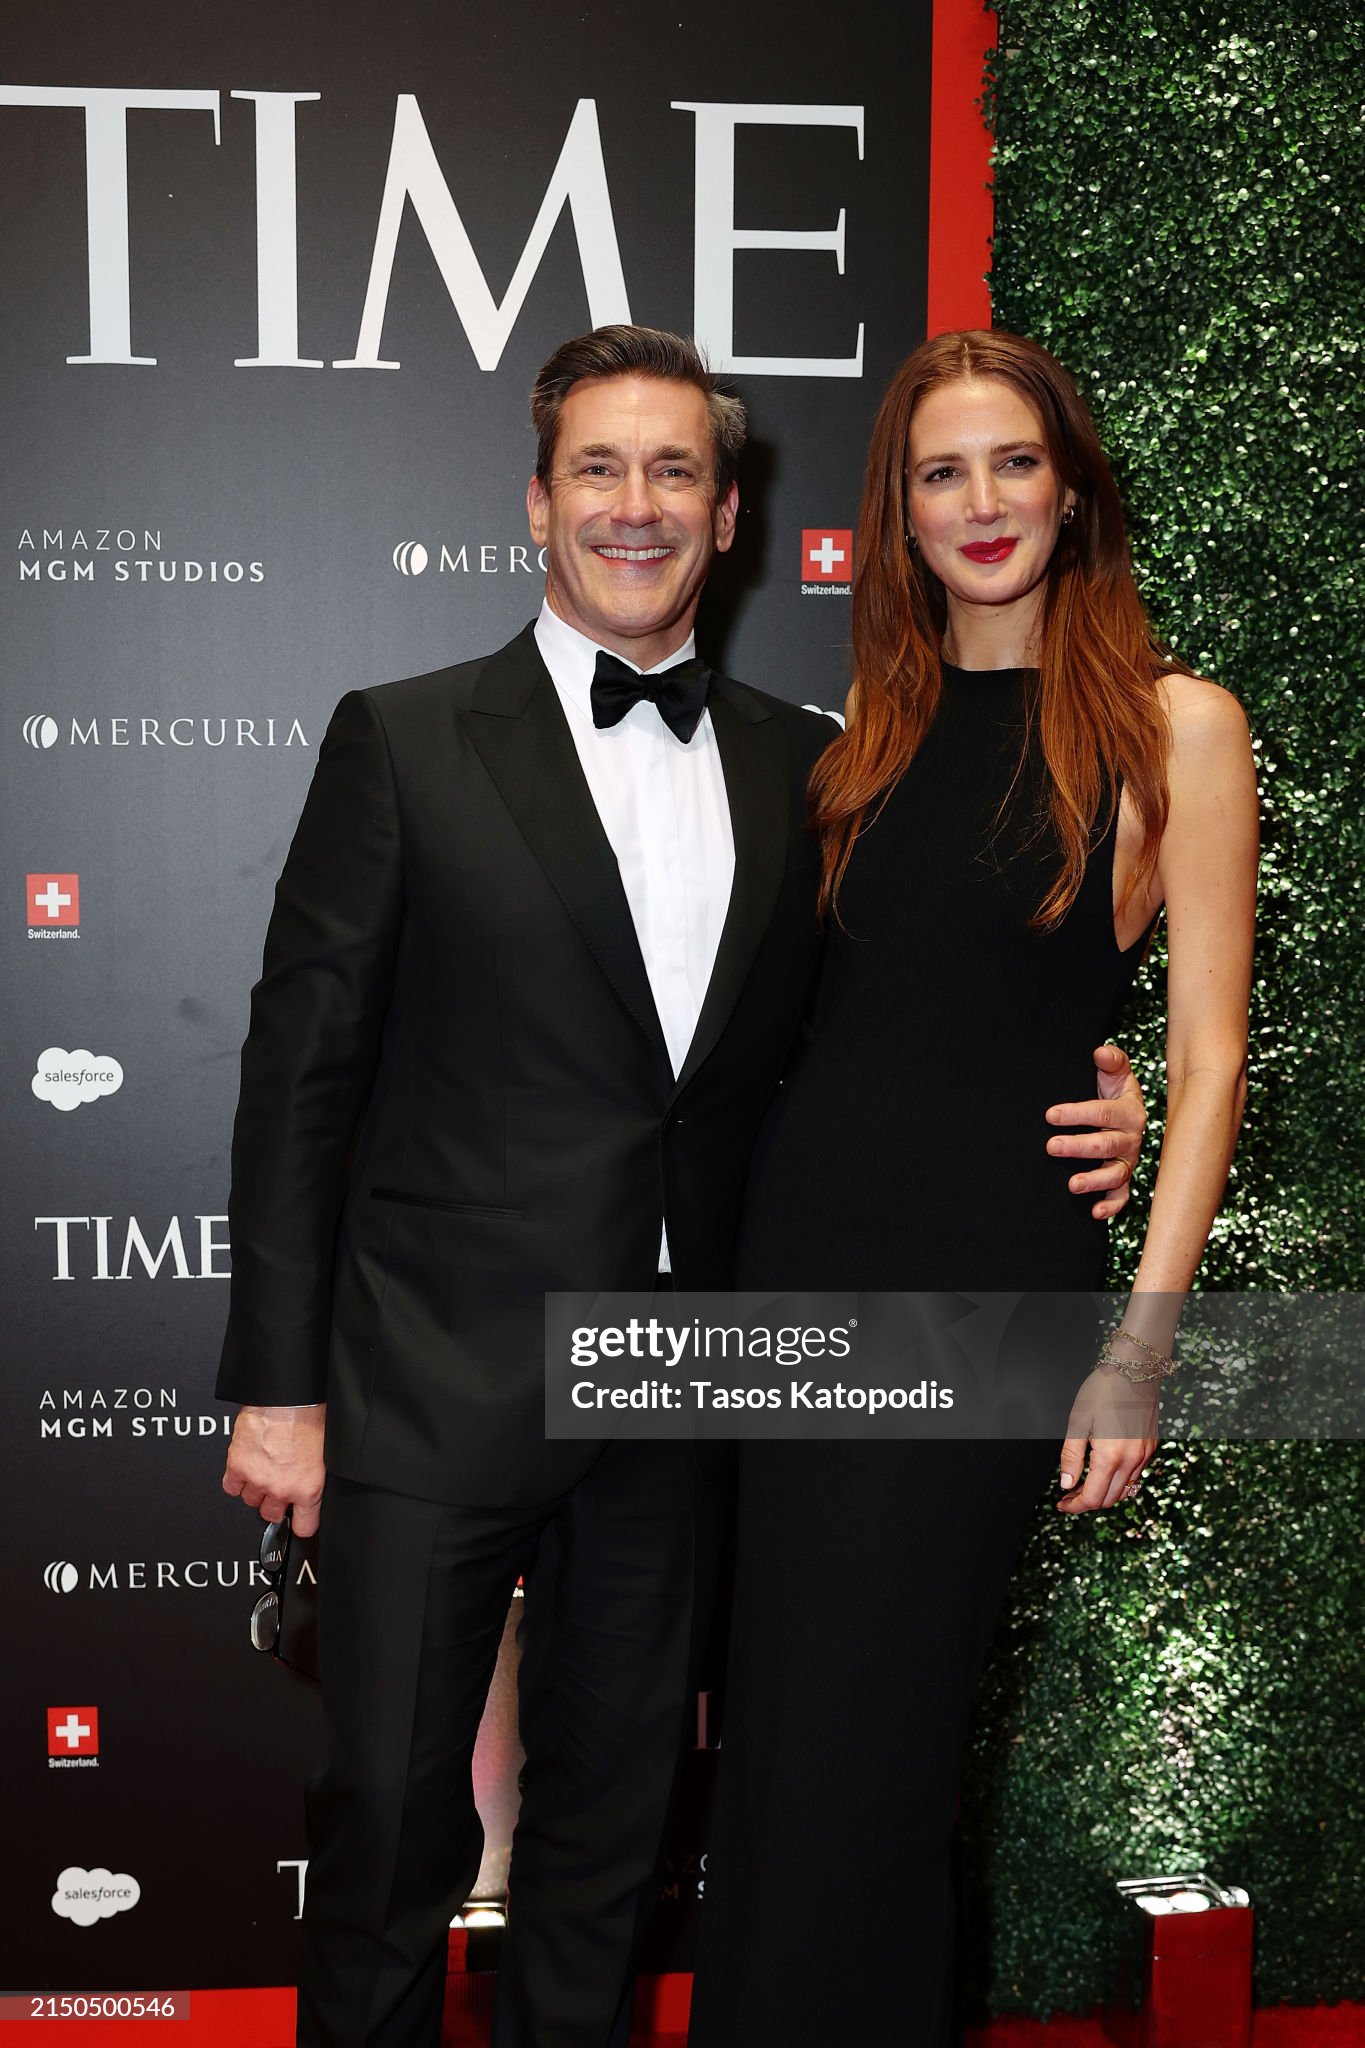 gettyimages-2150500546-2048x2048.jpg